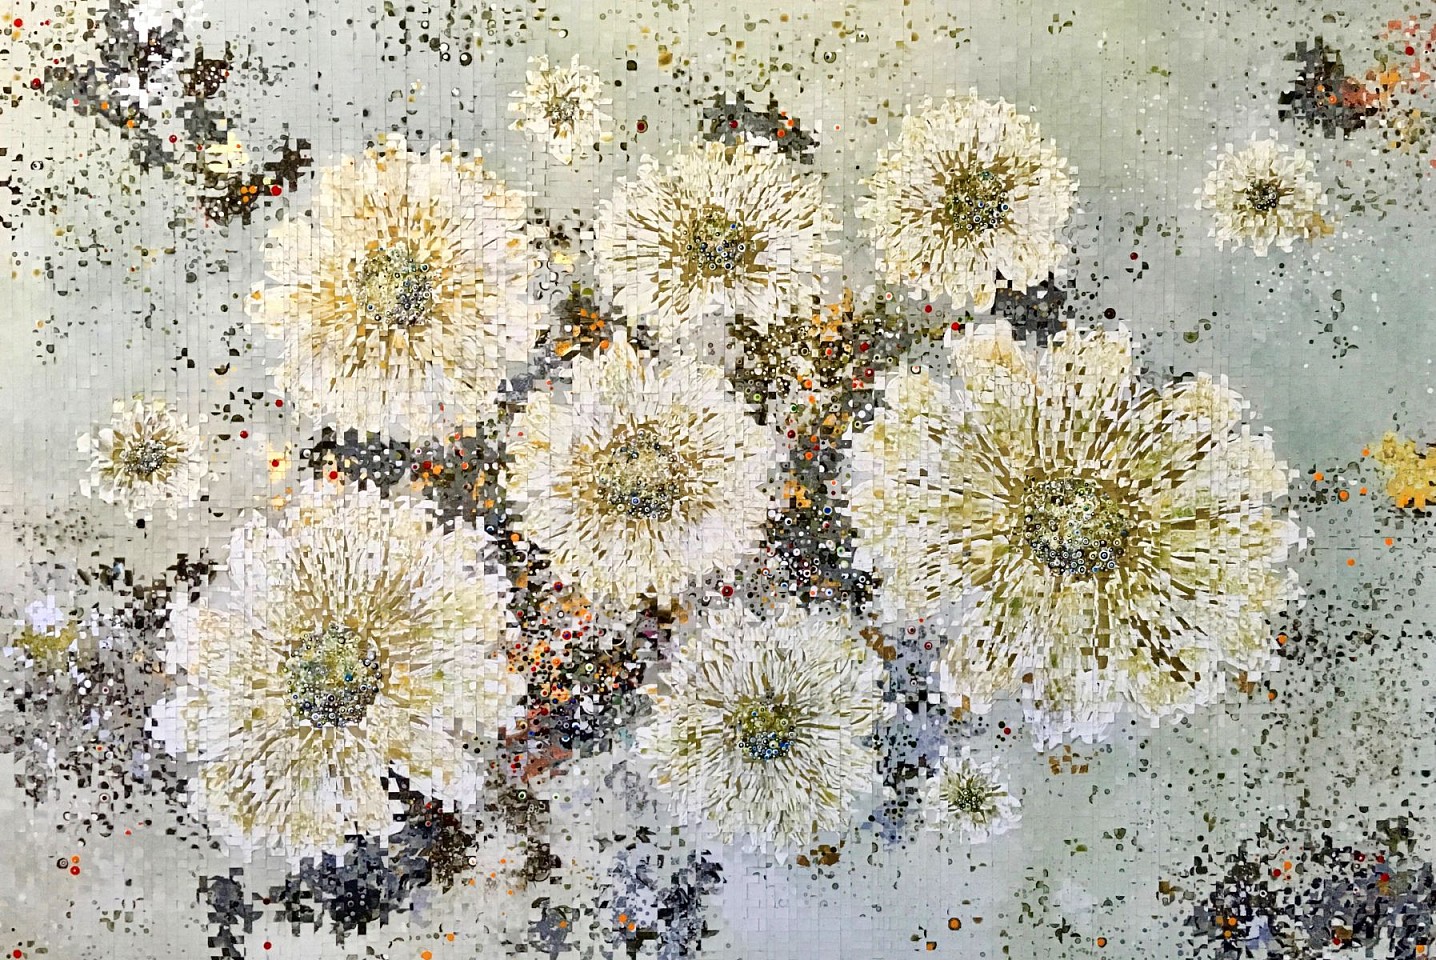 Anastasia Kimmett, Asters, 2021
Mixed Media on Paper, Mounted on Birch Panel, 44 x 66 in. (111.8 x 167.6 cm)
SOLD
07904
&bull;